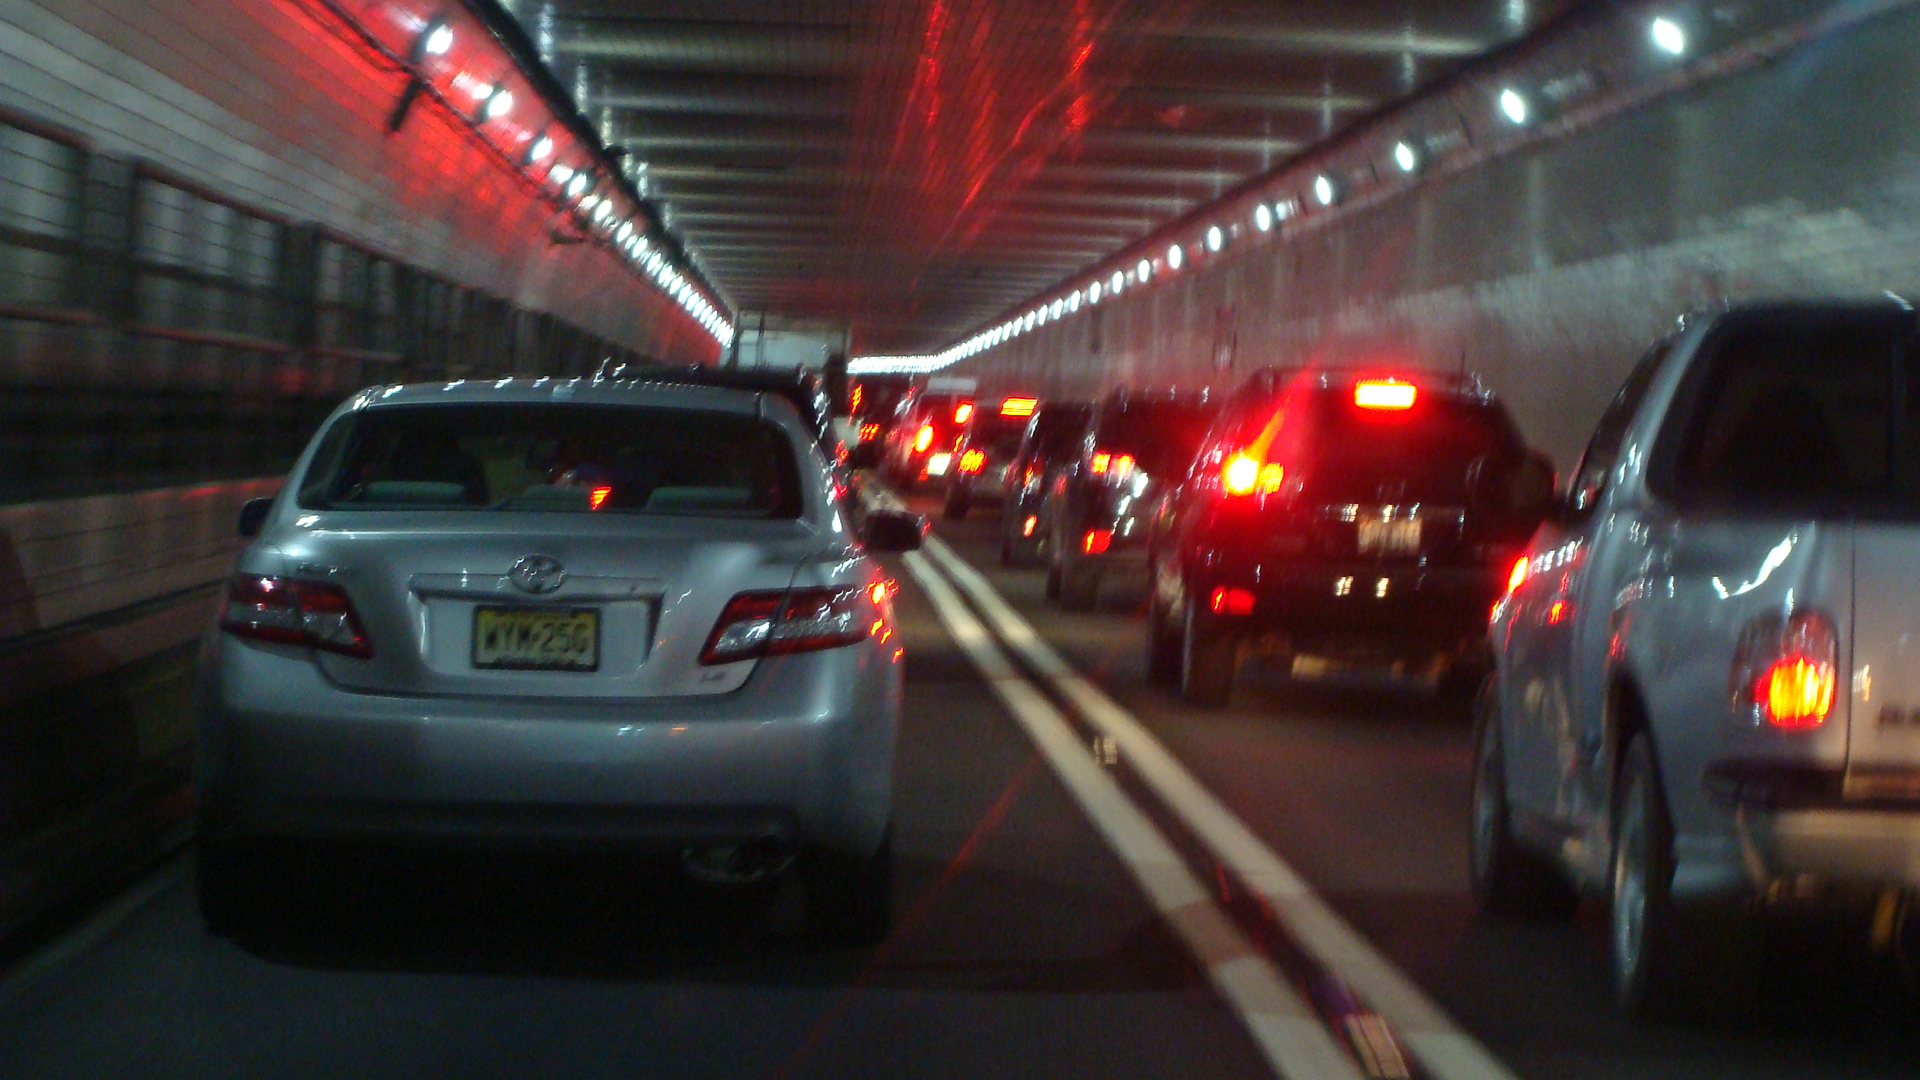 In the Lincoln Tunnel